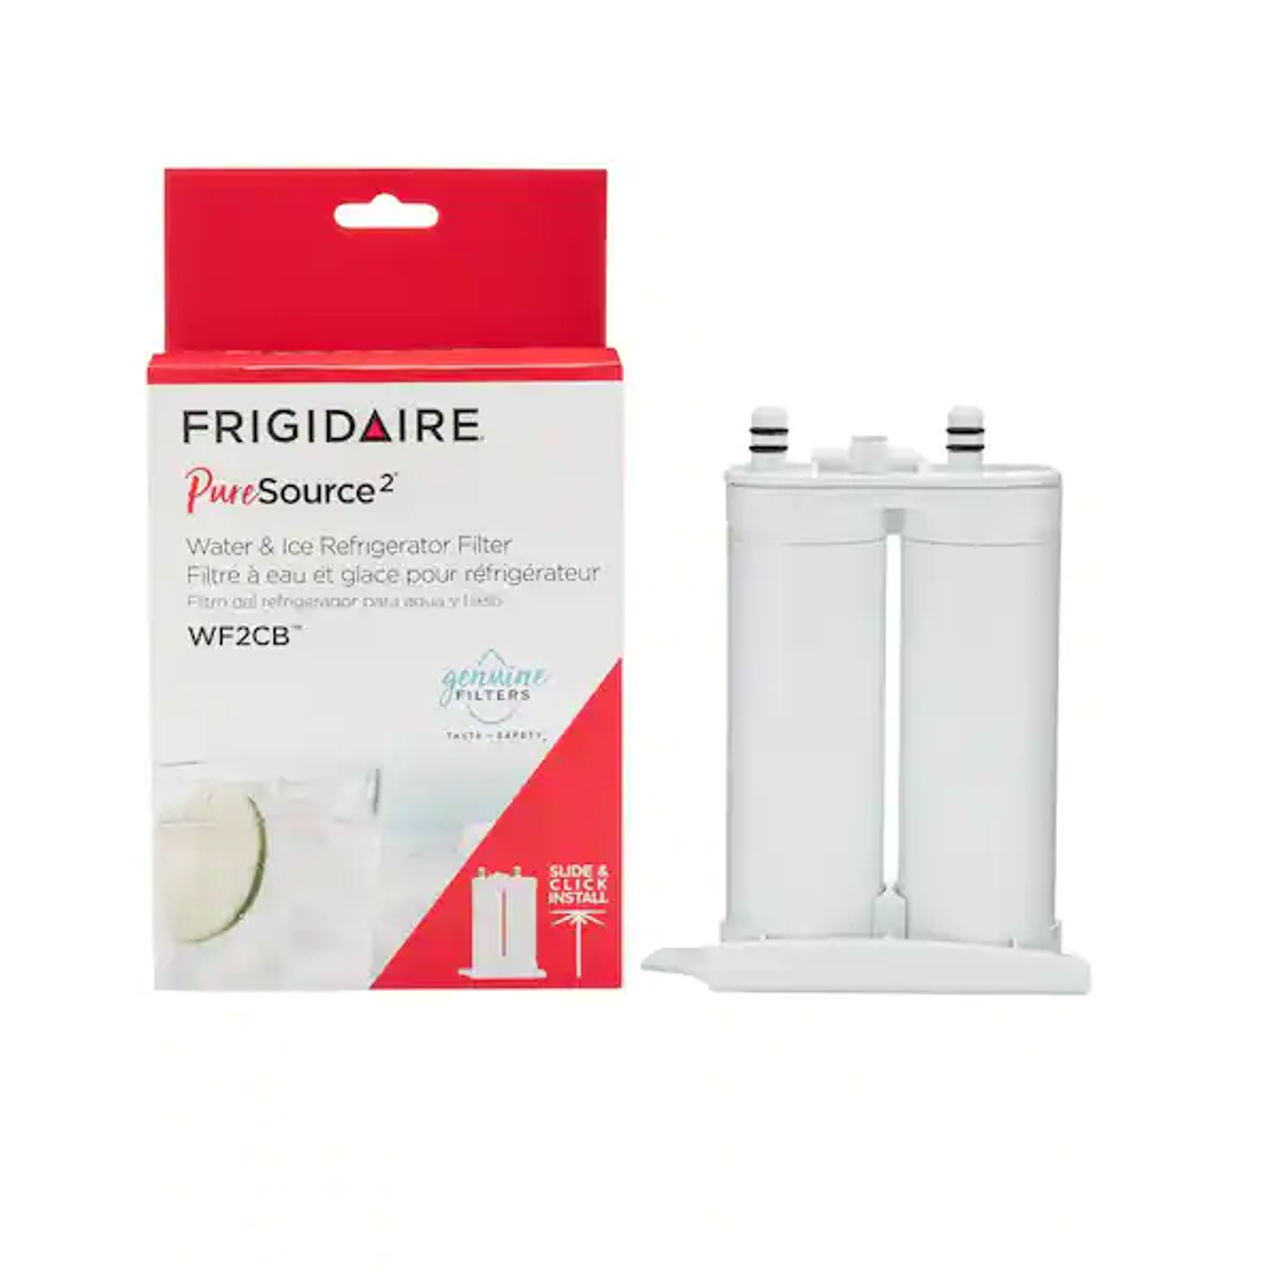 Frigidaire - Electrolux WF2CB - PureSource 2® Water and Ice Refrigerator Filter